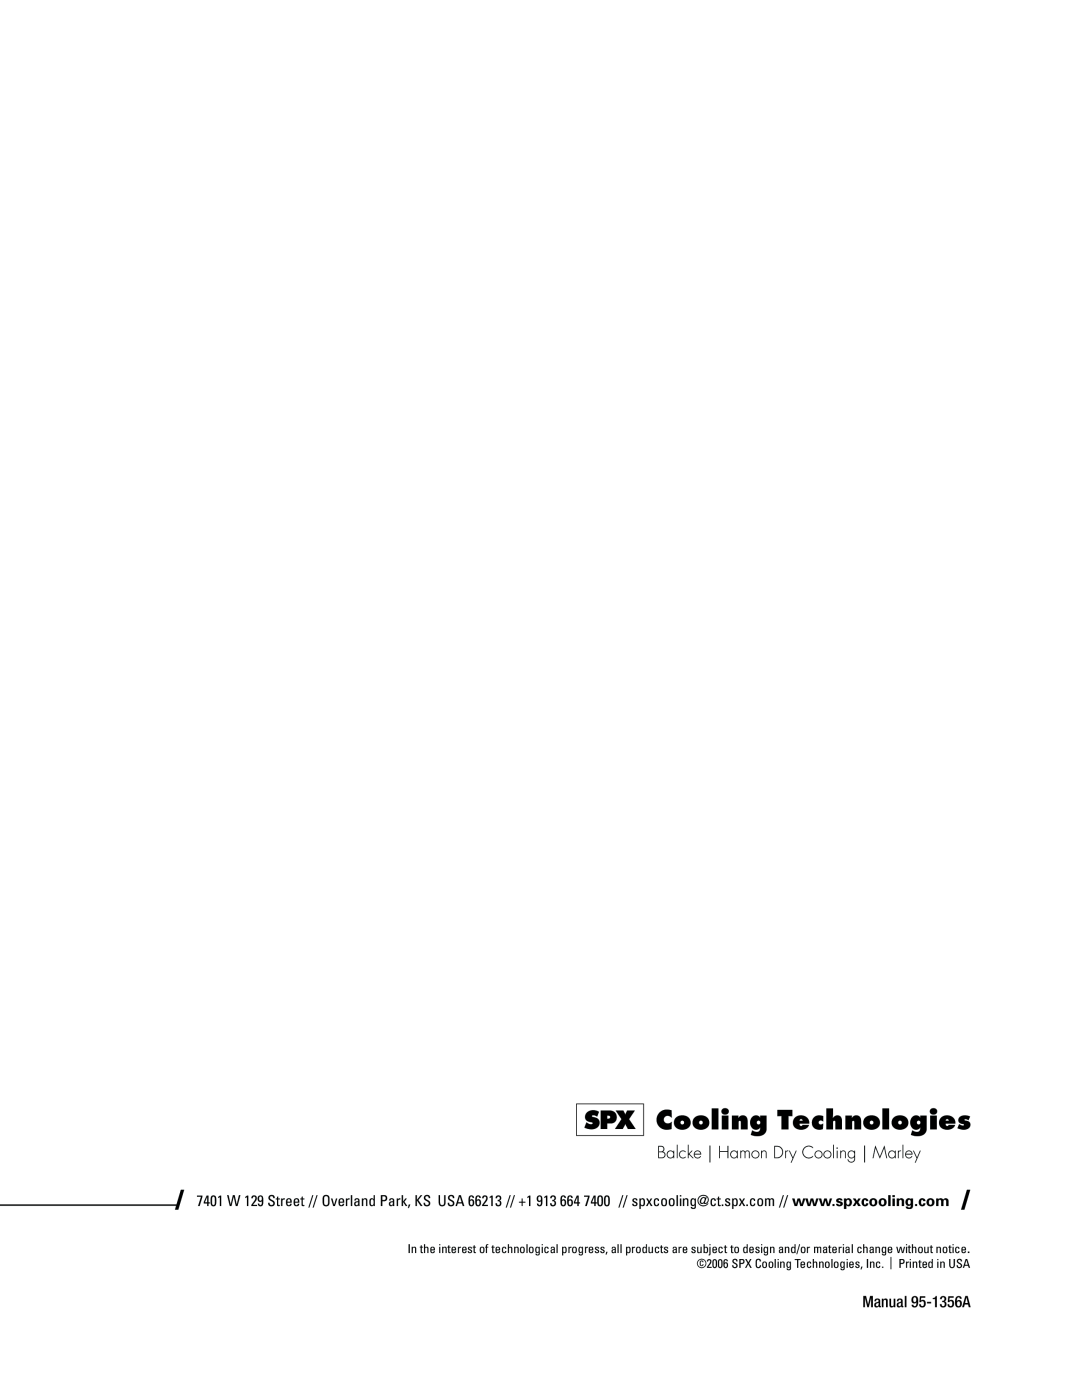 SPX Cooling Technologies 800 user manual Cooling Technologies, Balcke Hamon Dry Cooling Marley, Manual 95-1356A 